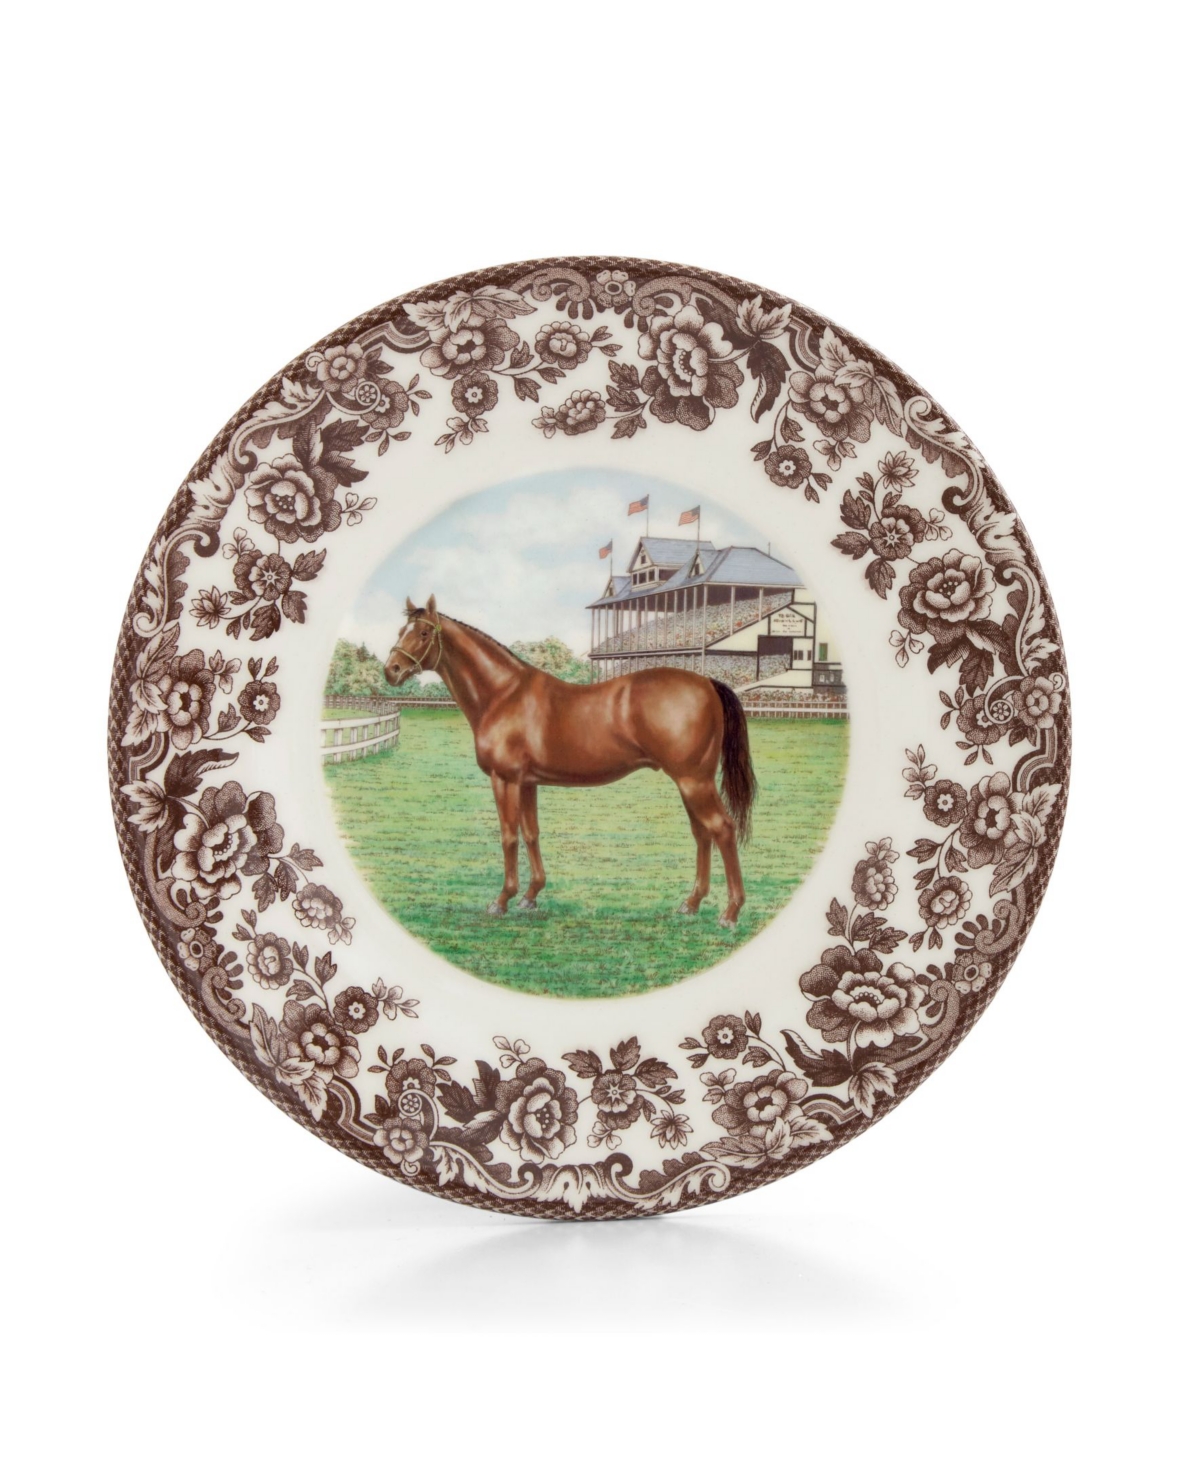 Thoroughbred Horse Salad Plate - Brown